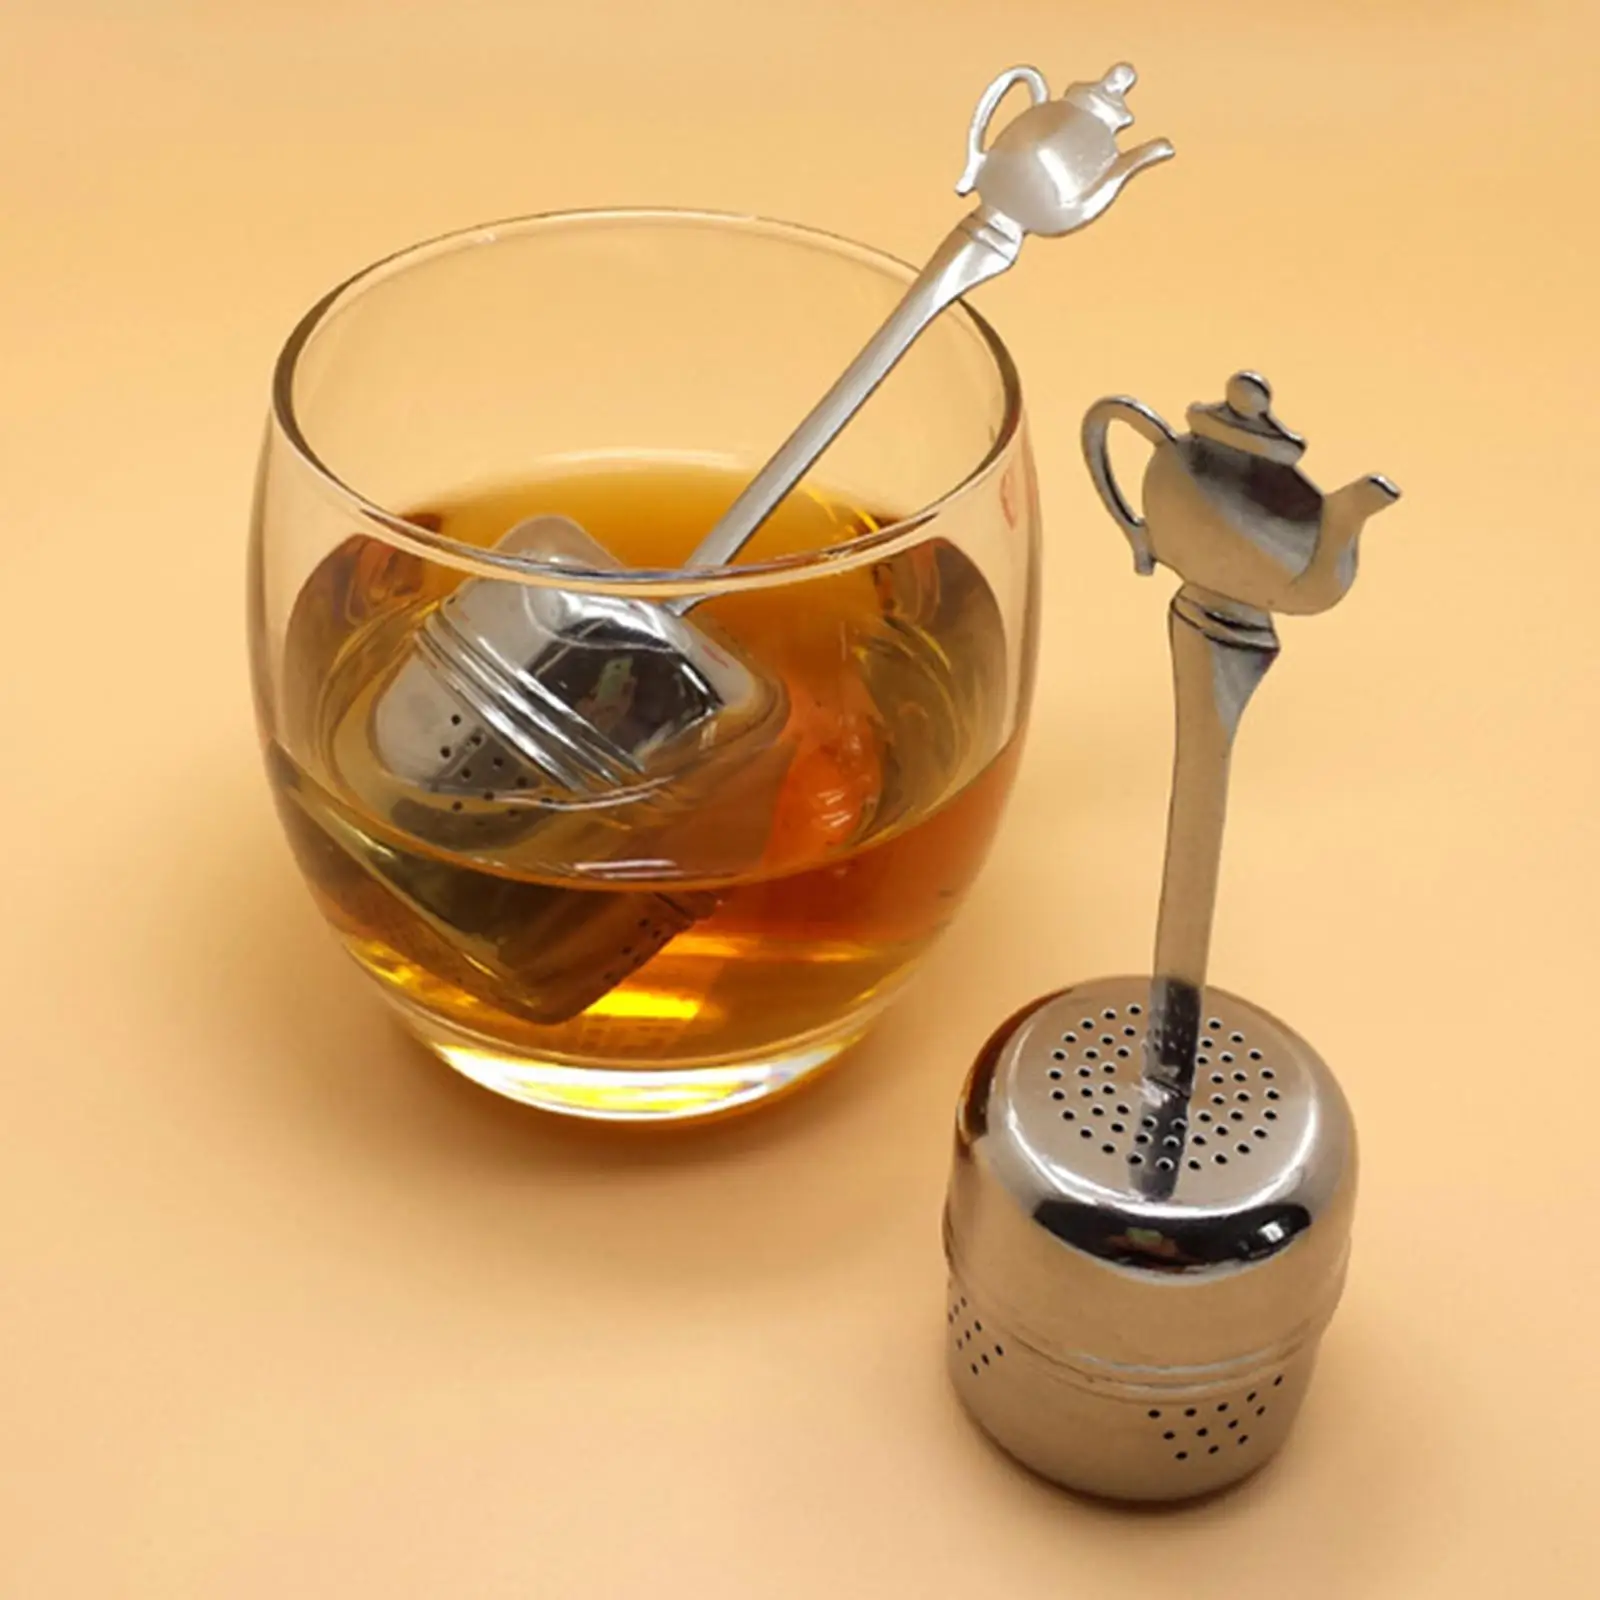 Tea Strainer with Handle Reusable 304 Stainless Steel Tea Steeper Tea Infuser for Loose Tea Spices Seasonings Cup and Teapot Bar